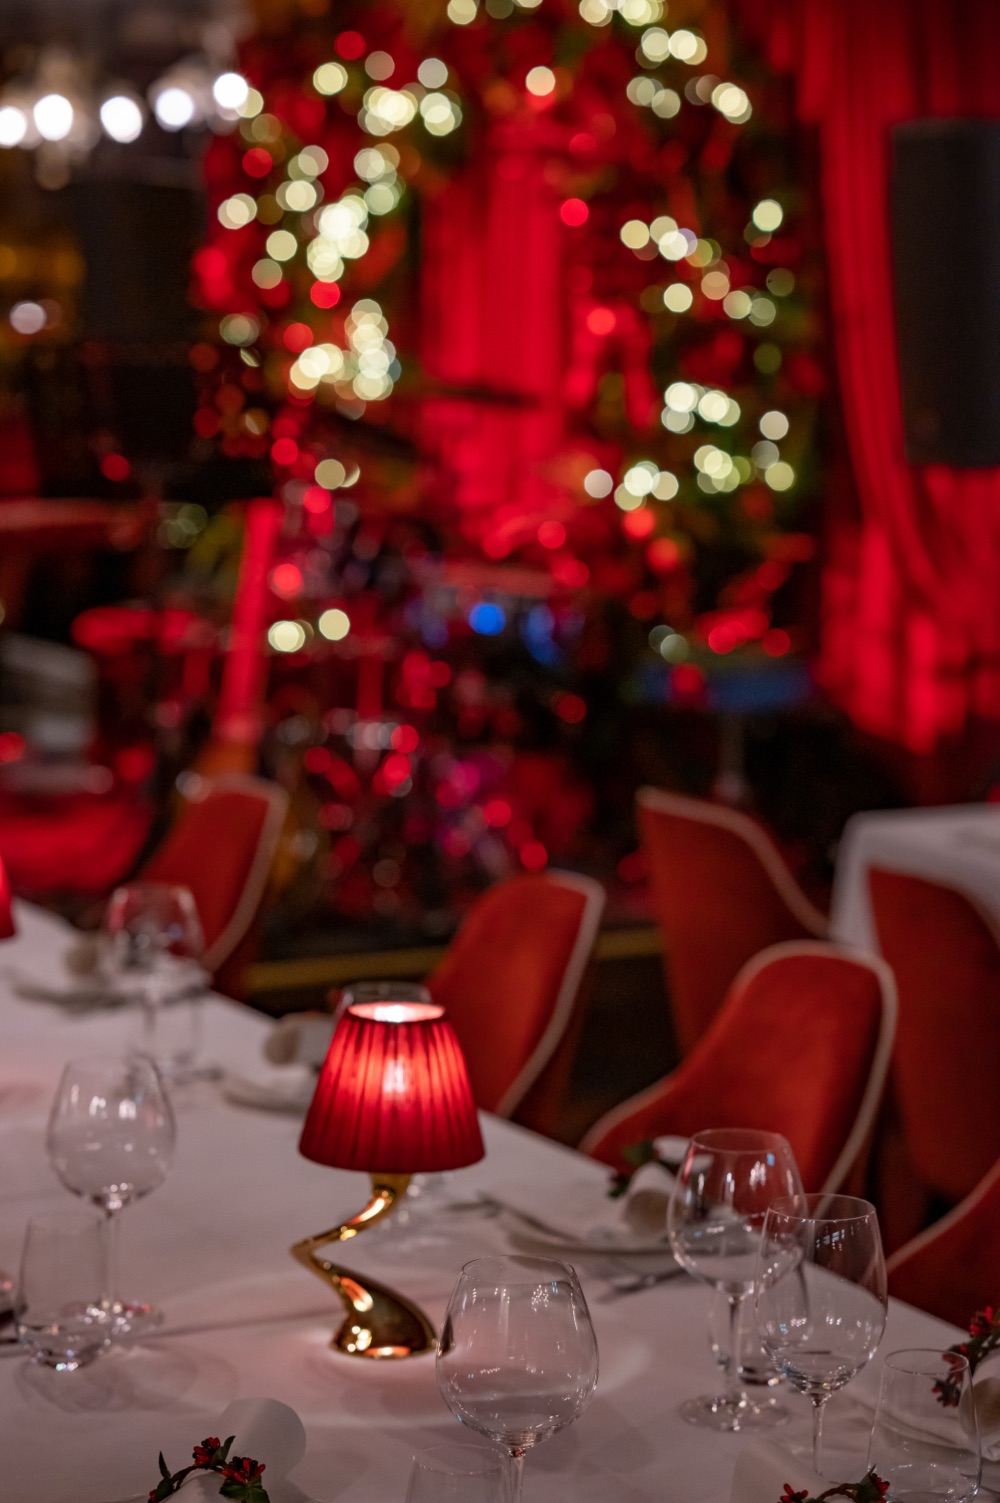 Festive dining table in a restaurant